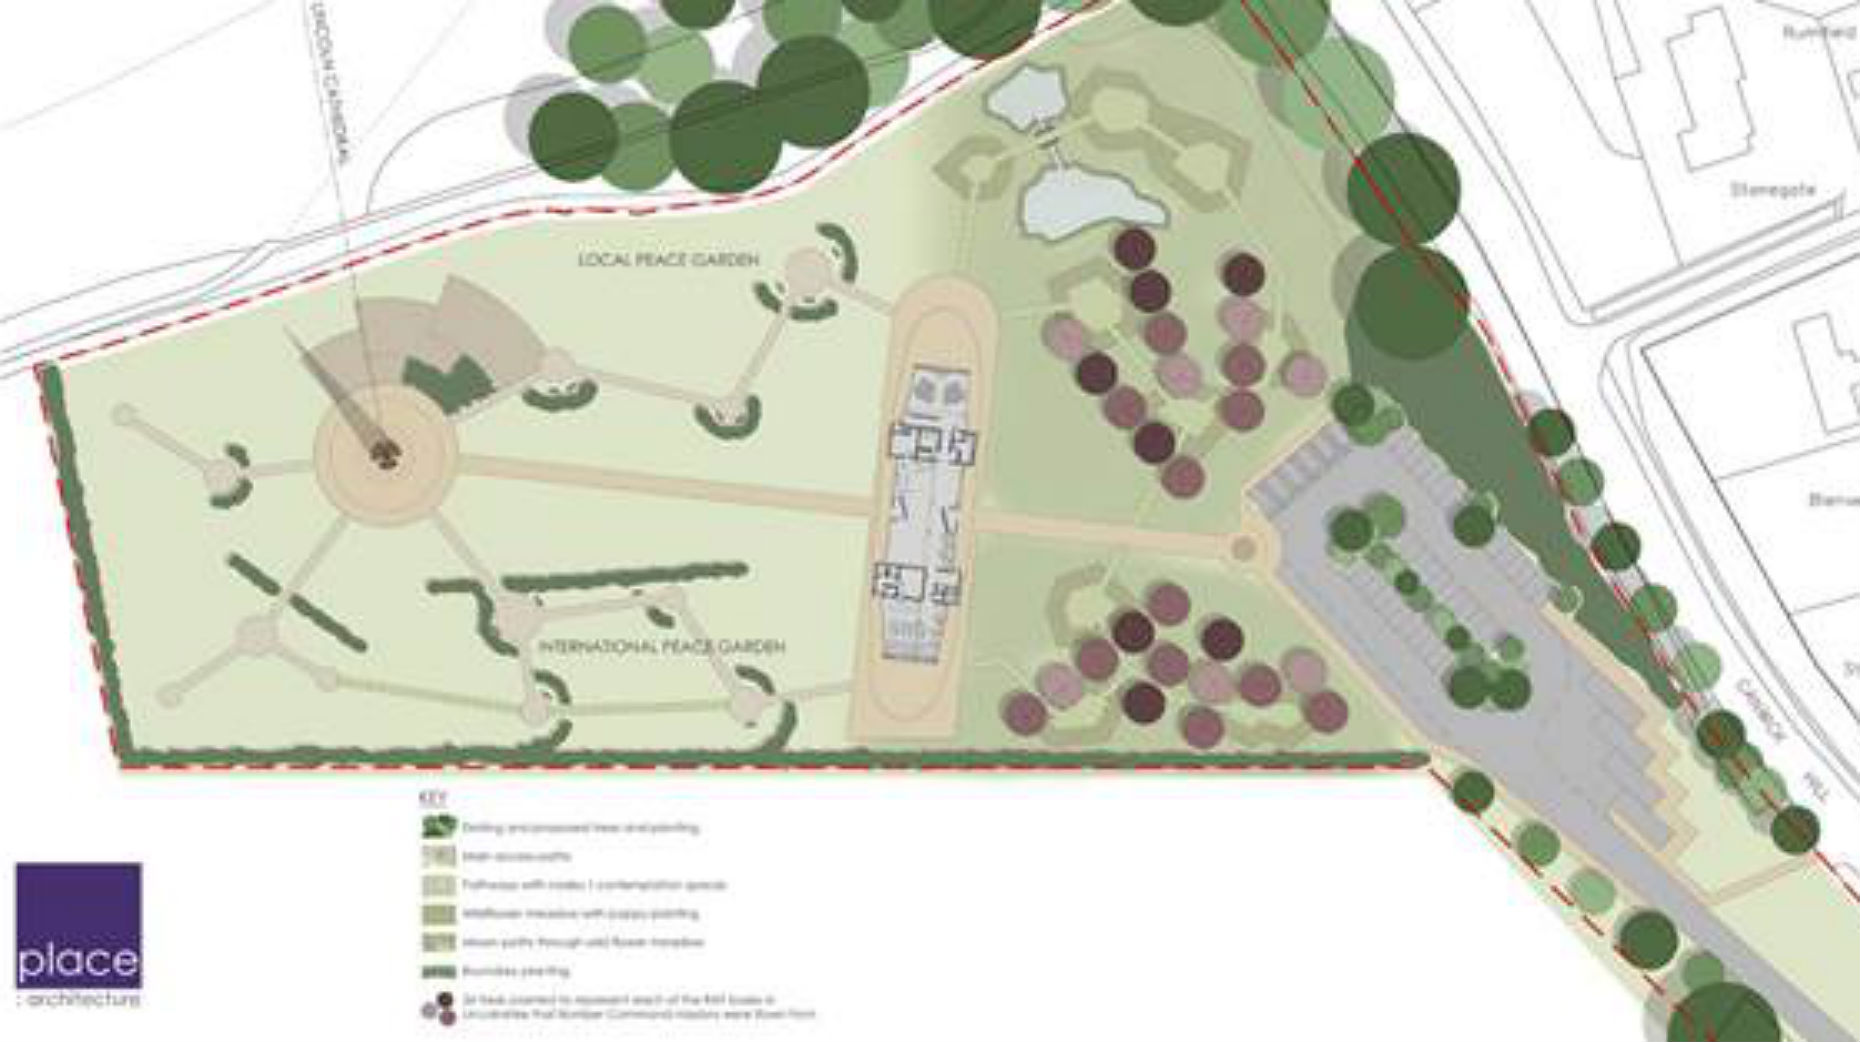 An overview of the memorial site plans. Photo: Place Architecture